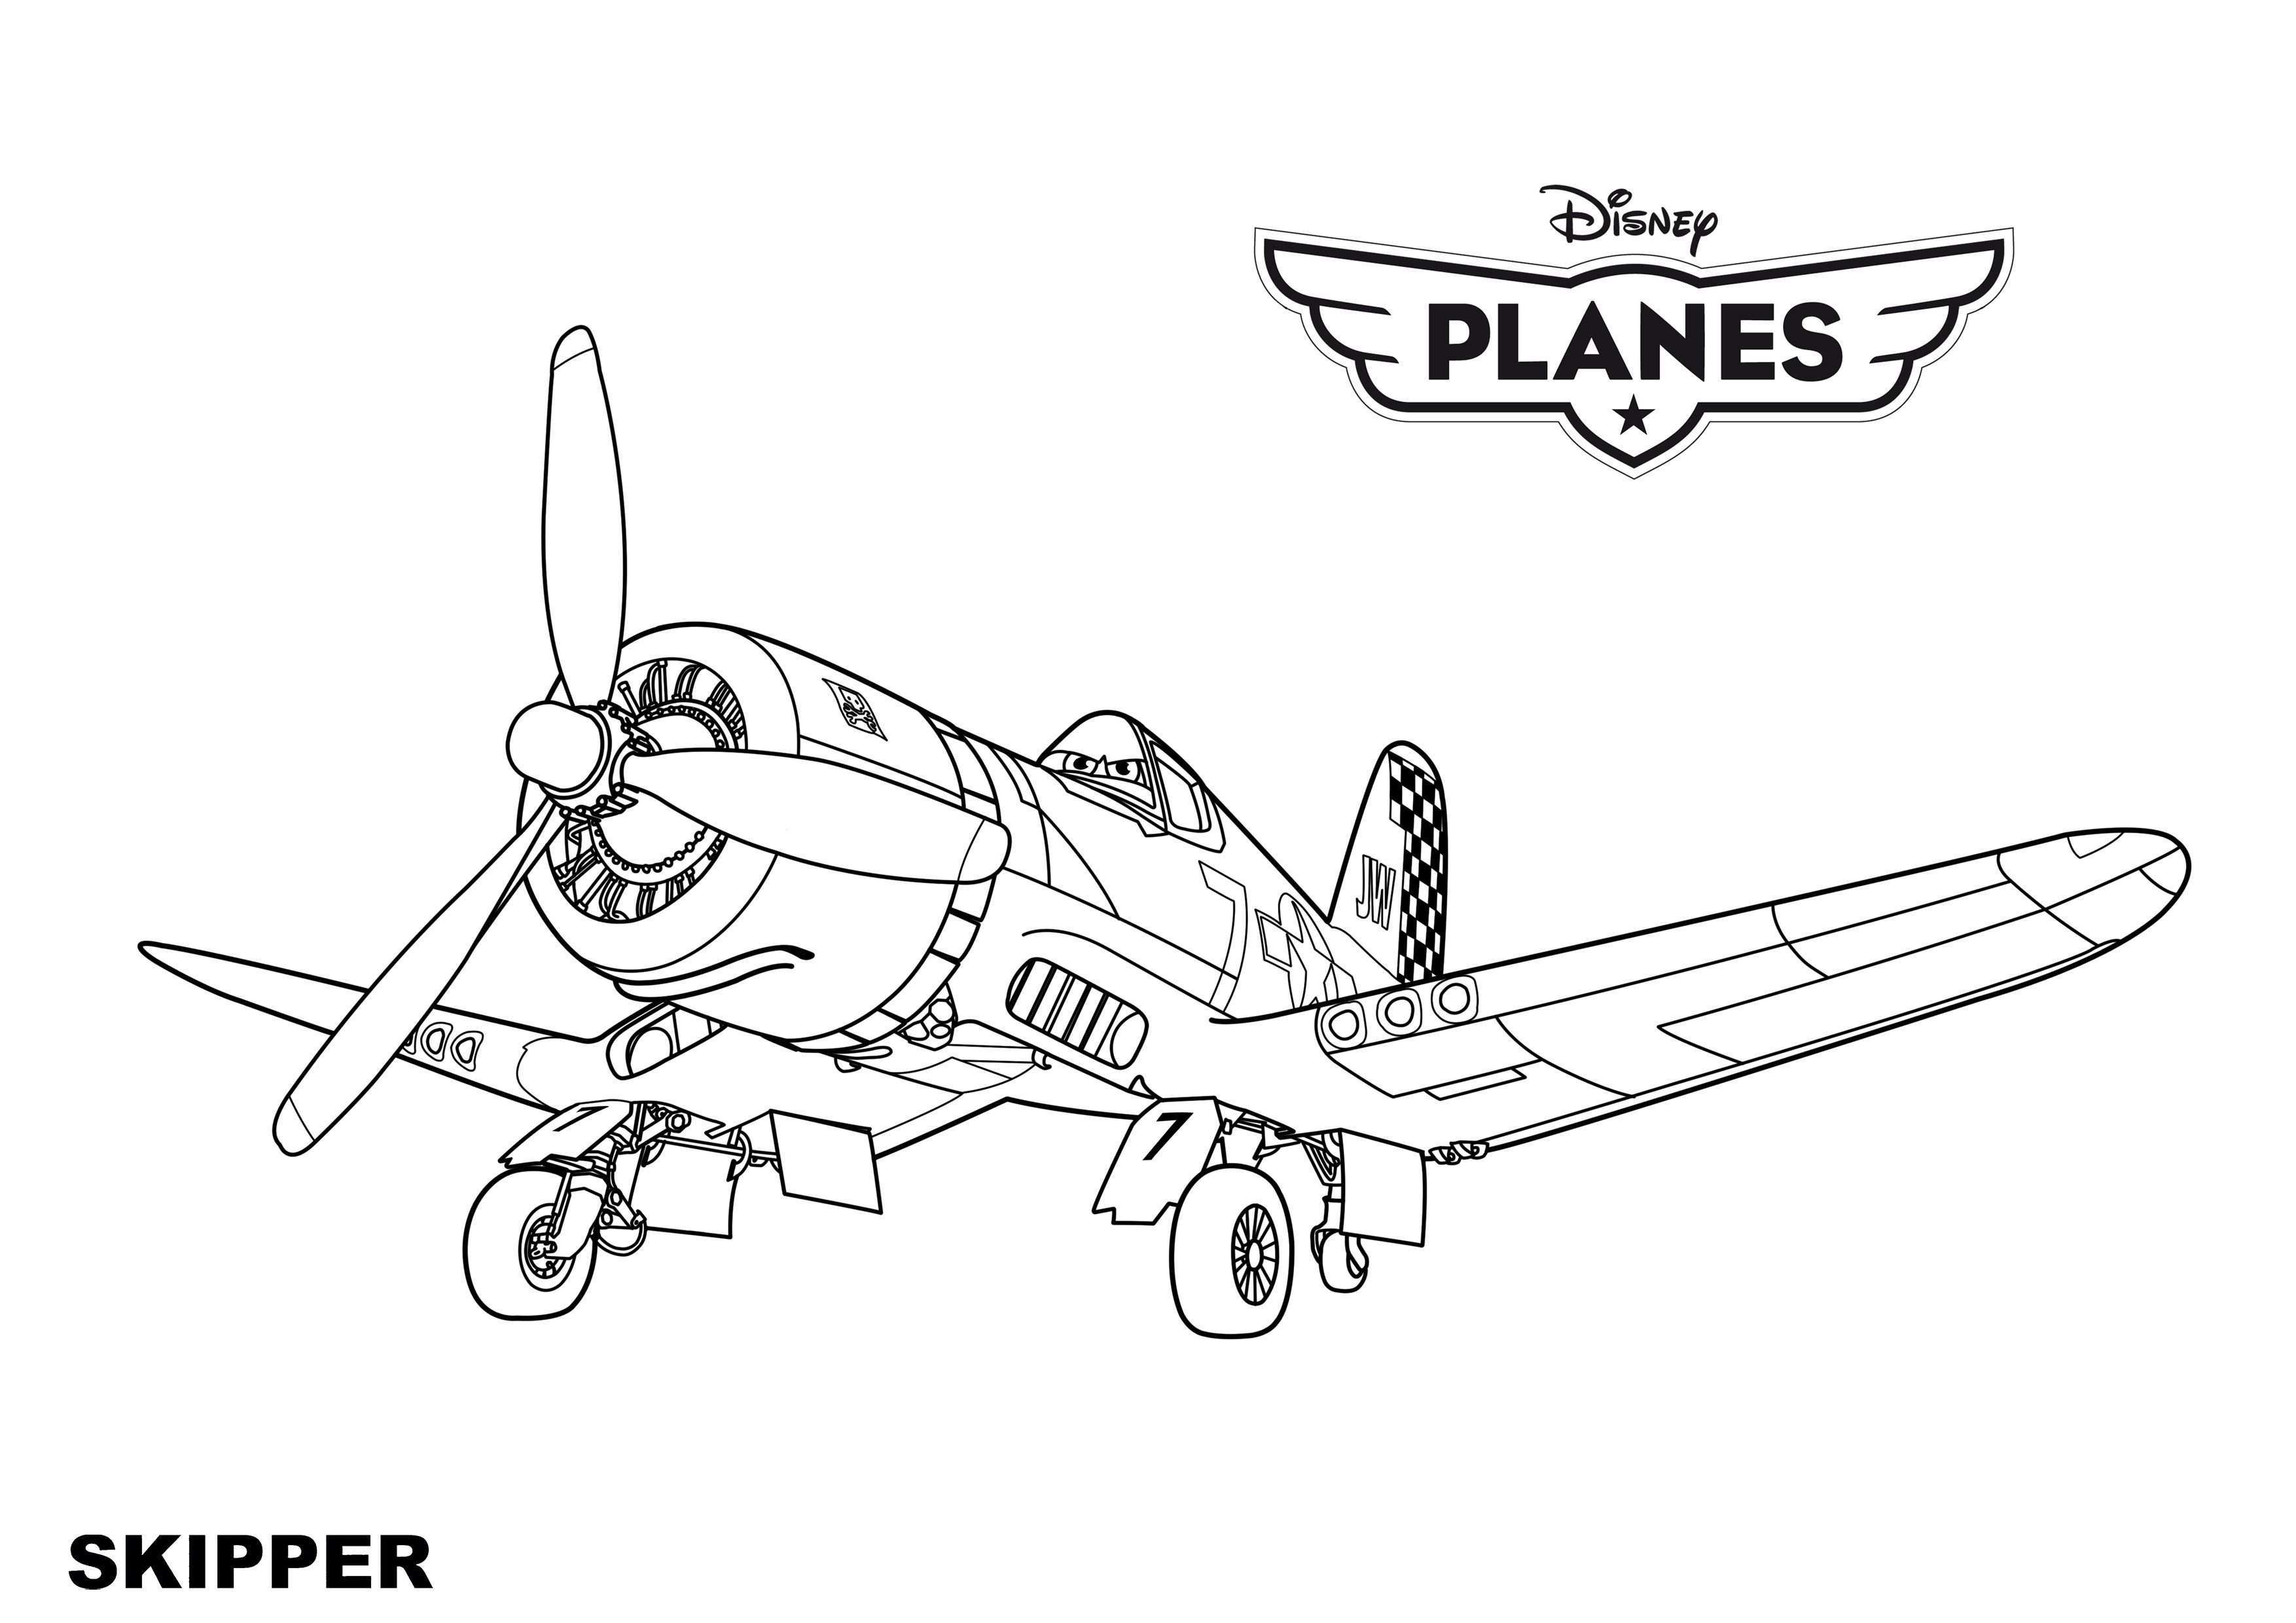 Disney Planes Coloring Pages Airplane Coloring Pages Disney Coloring Pages Coloring P